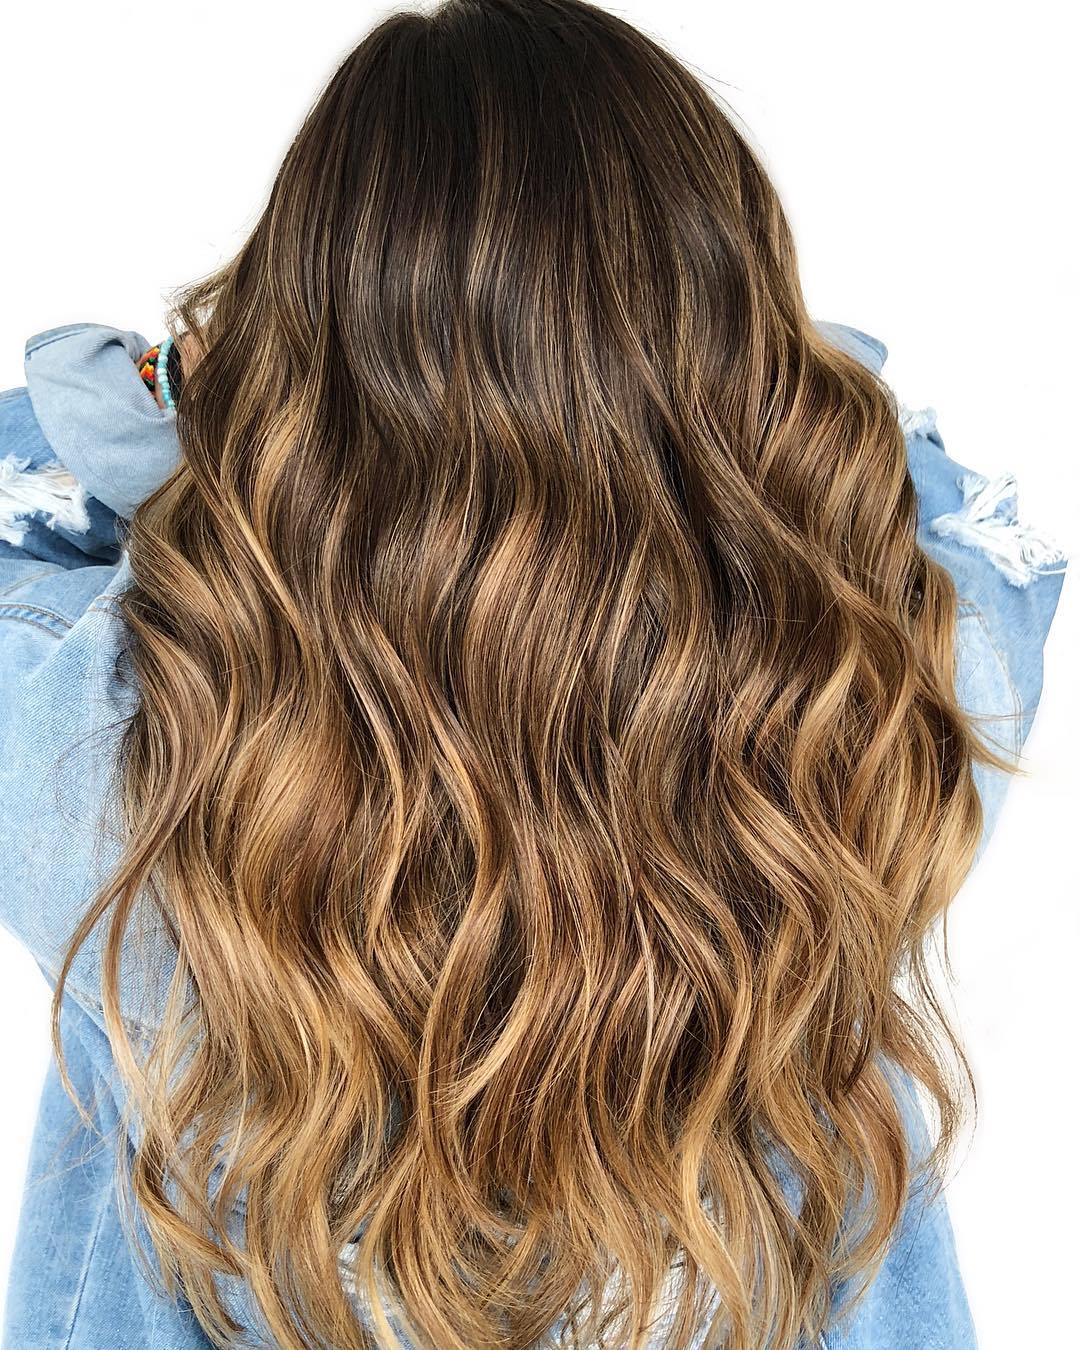 20 Ideas of Honey Balayage Highlights on Brown and Black Hair